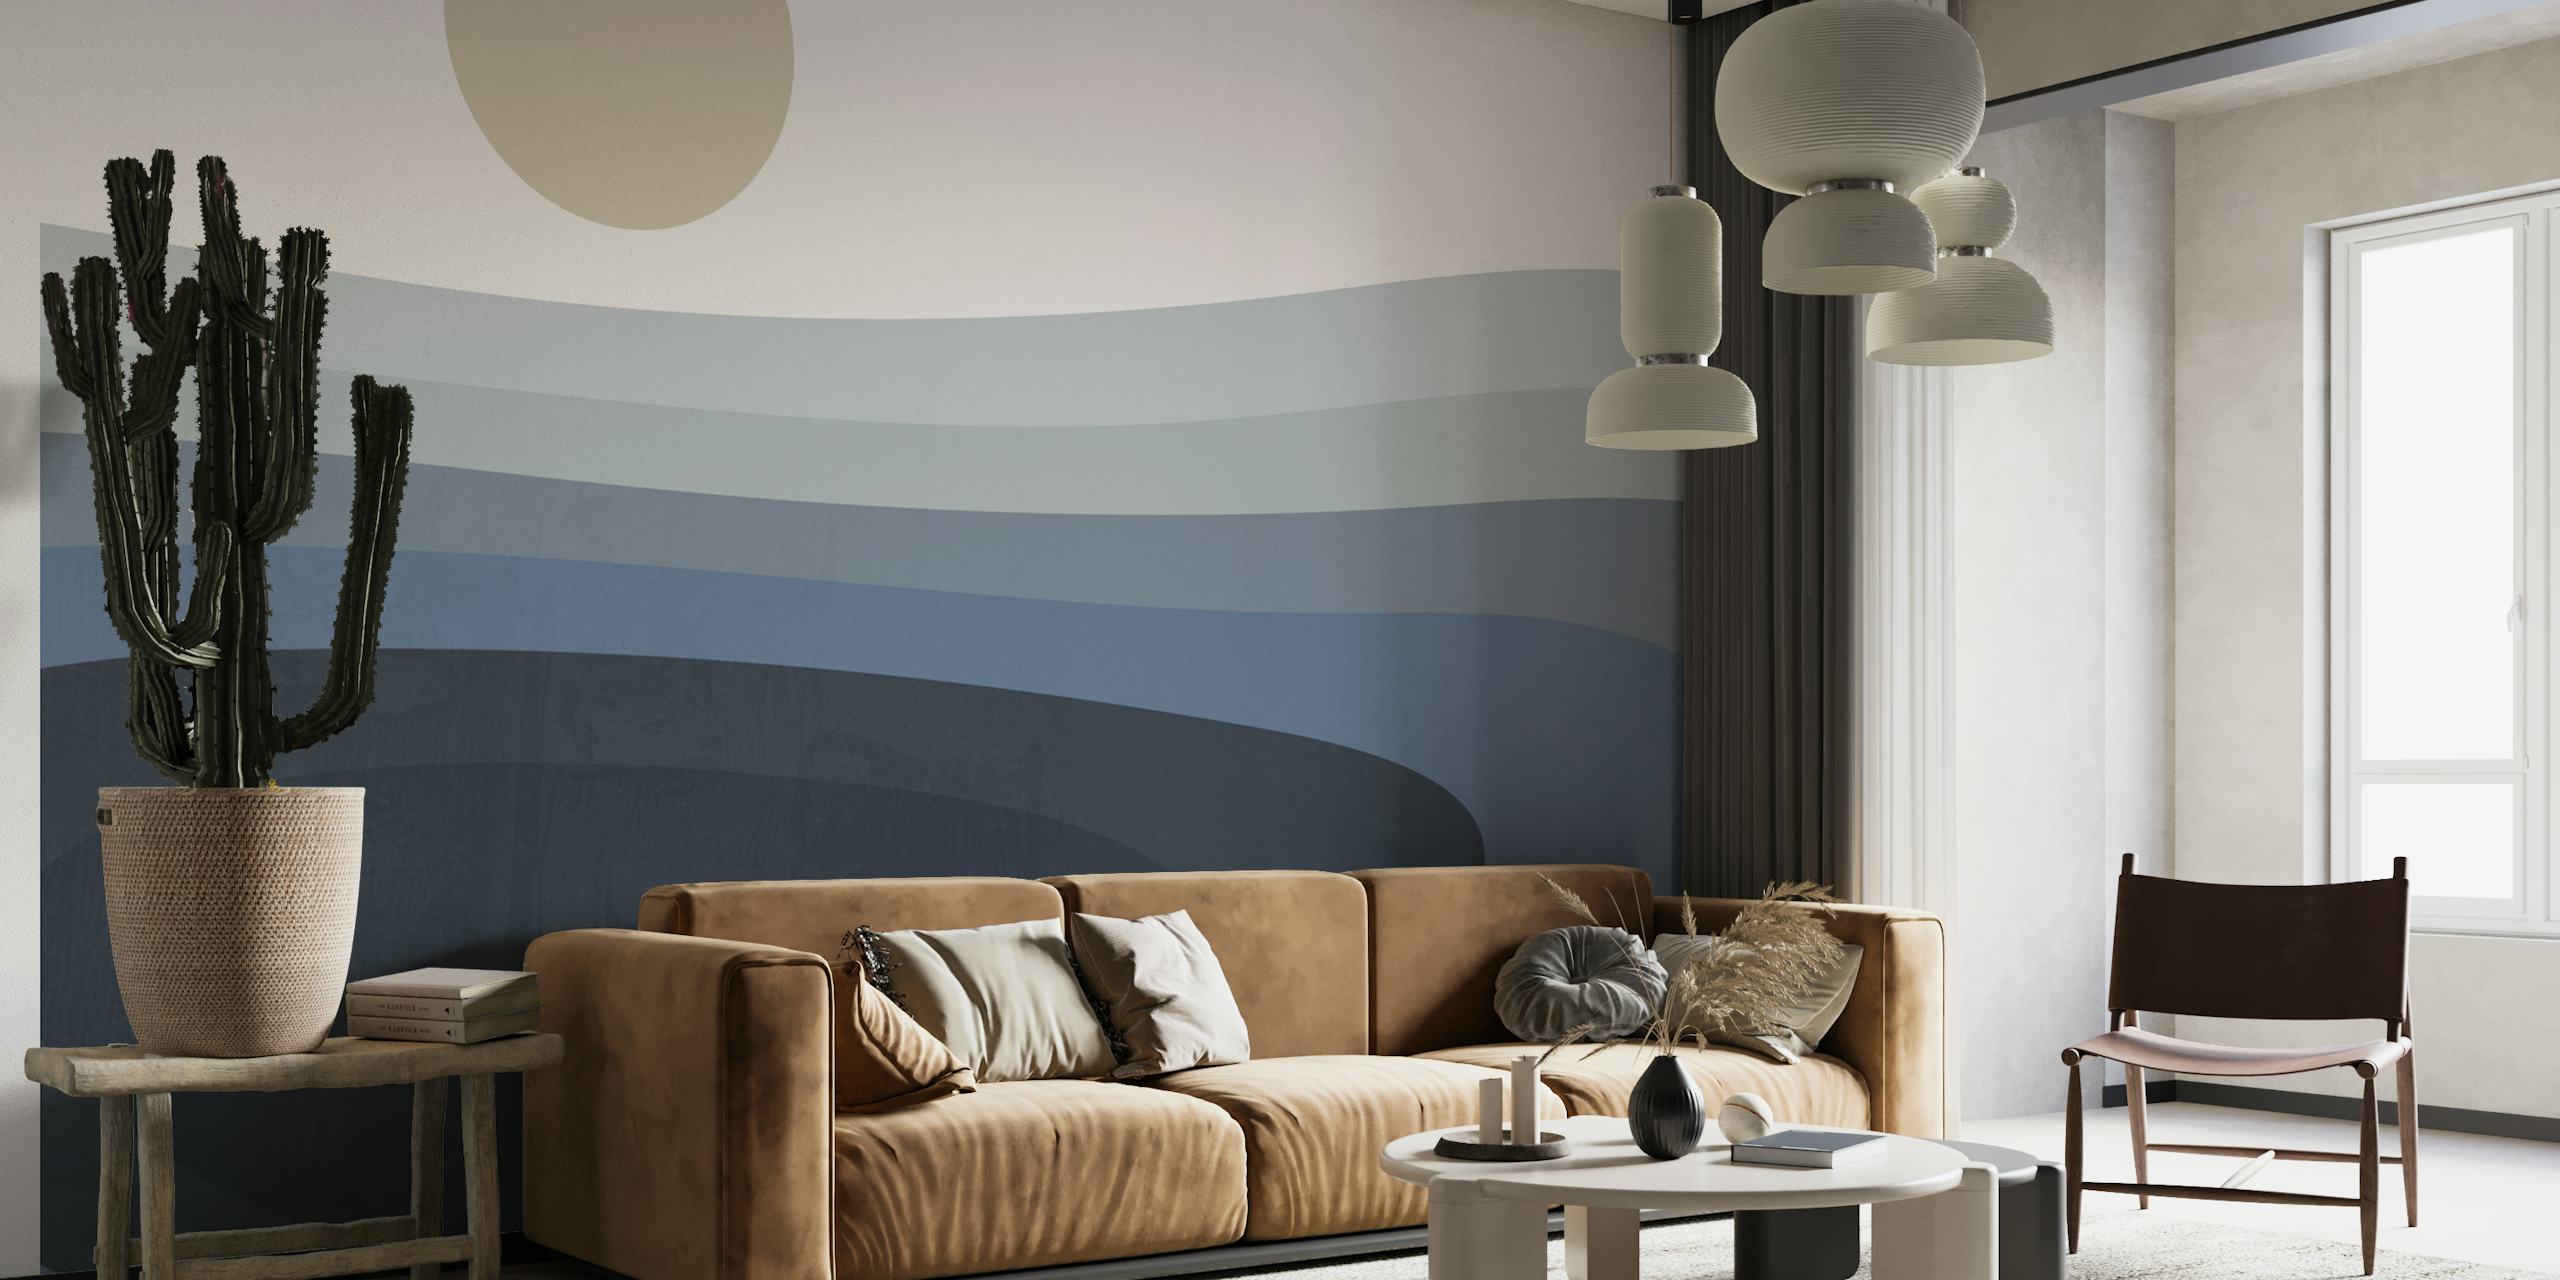 Abstract Landscape 2 wall mural with blue shades and sun illustration